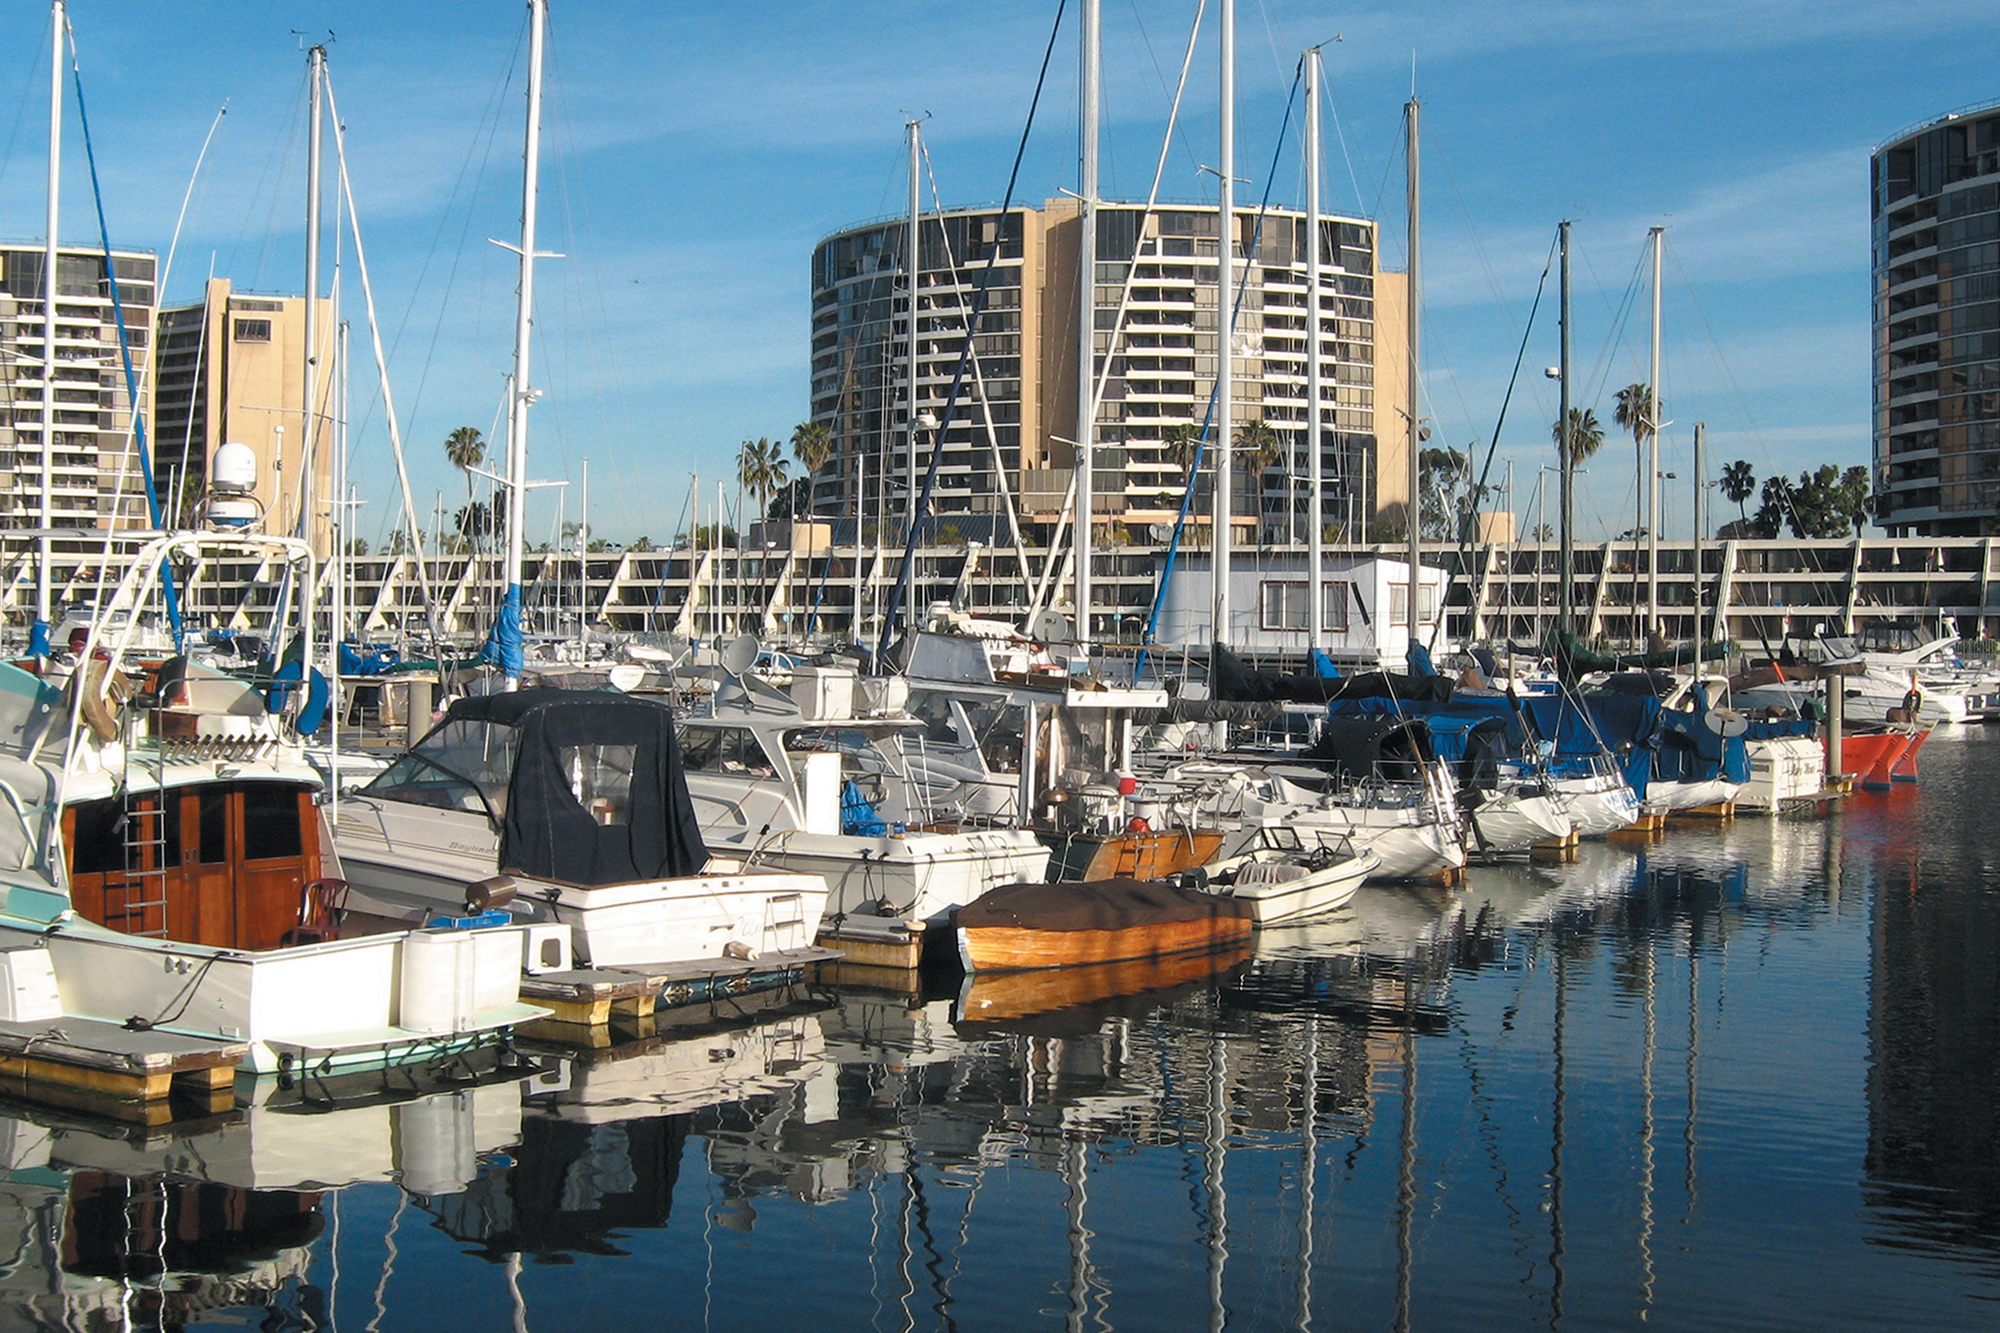 Marina Afternoon by Rich J. Velasco